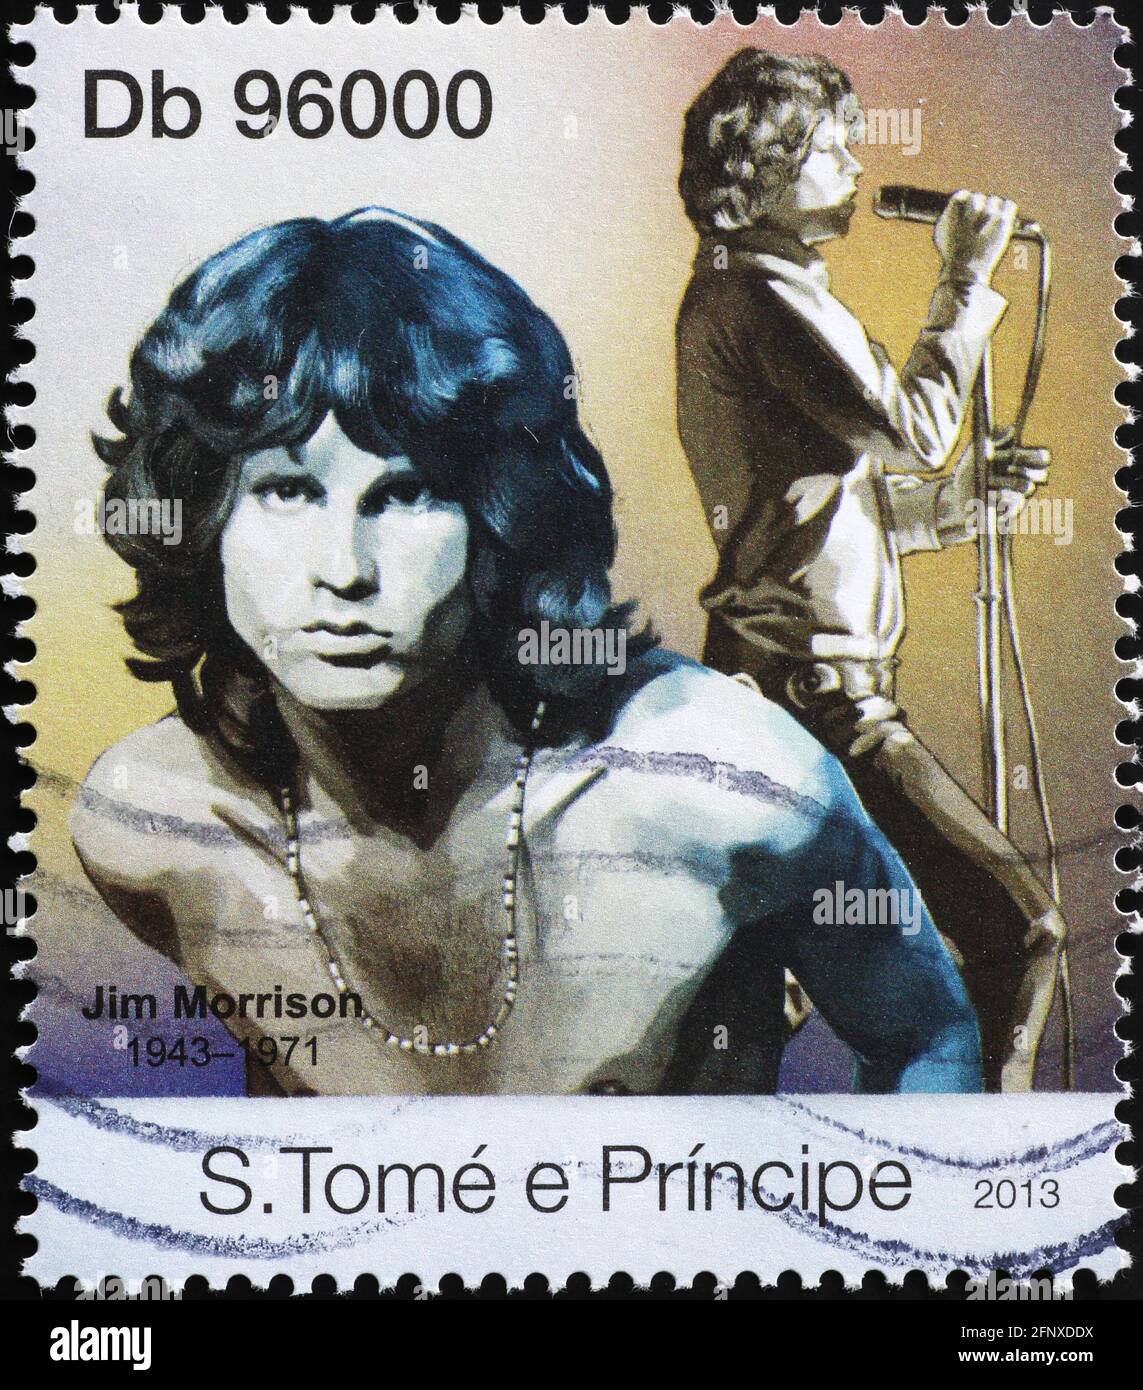 Jim Morrison of the Doors on postage stamp Stock Photo